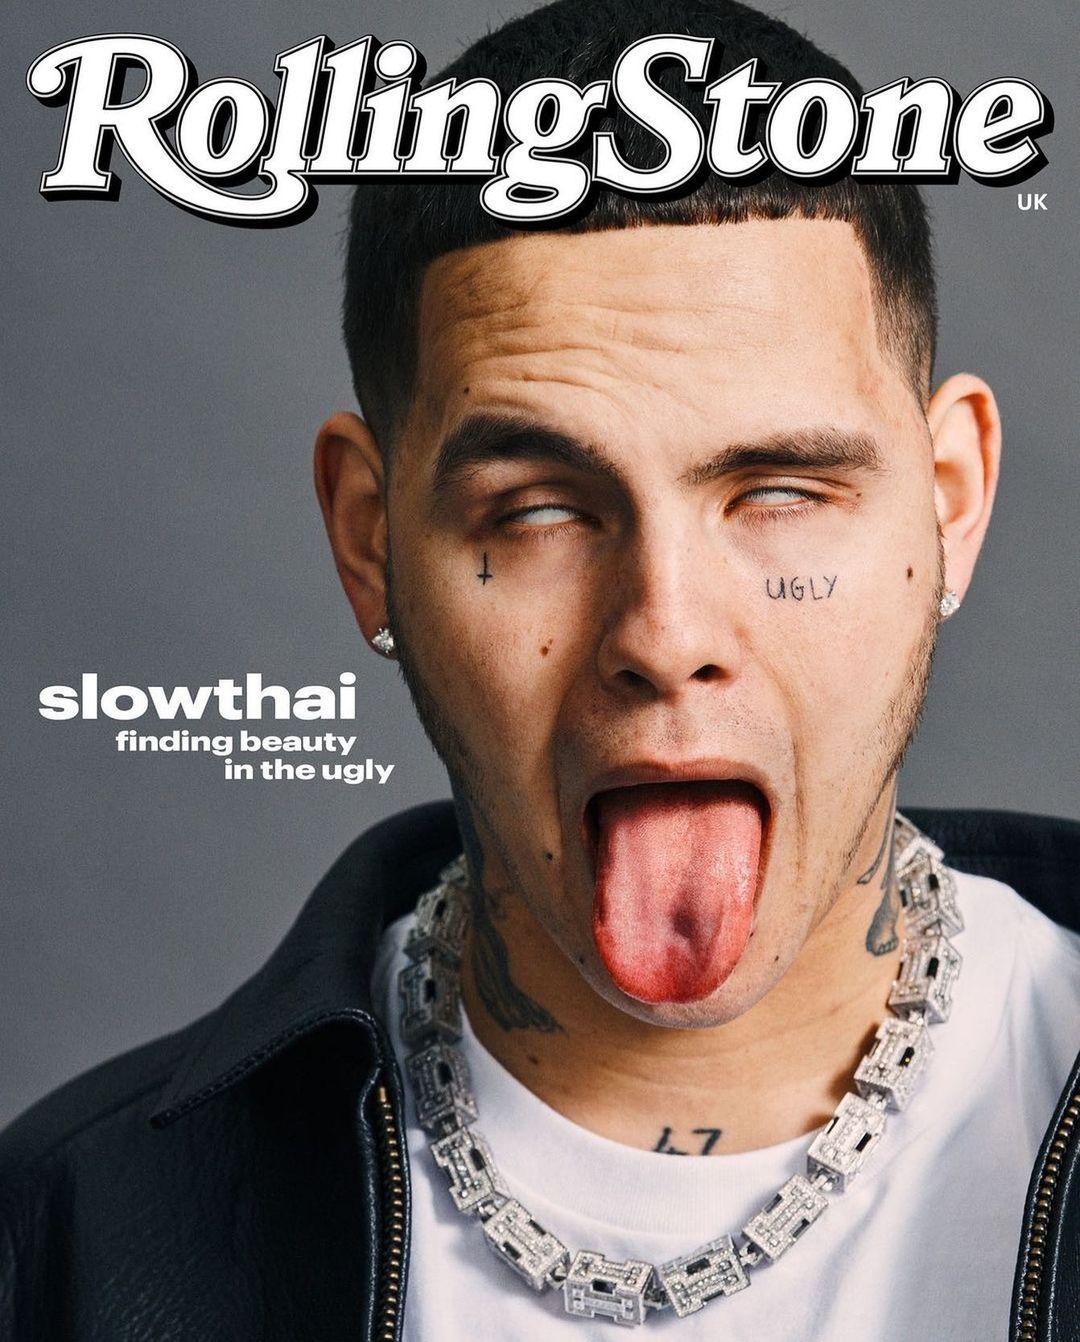 class="content__text"
 😜 Posted @withregram • @rollingstoneuk@slowthai : finding beauty in the ugly ⭐⁠
⁠
What do you do when you find out therapy is not for you? If you’re this new dad, you return to your friends and to rock music – the genre Tyron Kaymone Frampton always wanted to make – instead for curative release⁠
⁠
📲 Hit the link in bio to read the digital cover story.⁠
⁠
Words: @hannahrose___ ⁠
Photography: @simonemmettstudio ⁠
Fashion Director: @JosephKocharian ⁠
Hair: @jlizzybarber ⁠
⁠
Ty wears necklace by @homer ; jacket and t-shirt, Ty's own.⁠
⁠
Editor-in-chief: @CliffJoannou ⁠
Art Director: @AlexHambis ⁠
Fashion and Beauty Director: @JosephKocharian ⁠
News Editor: @nickjwreilly ⁠
Art Editor: @mouchety ⁠
Social Media Producer: @SoapyPorter